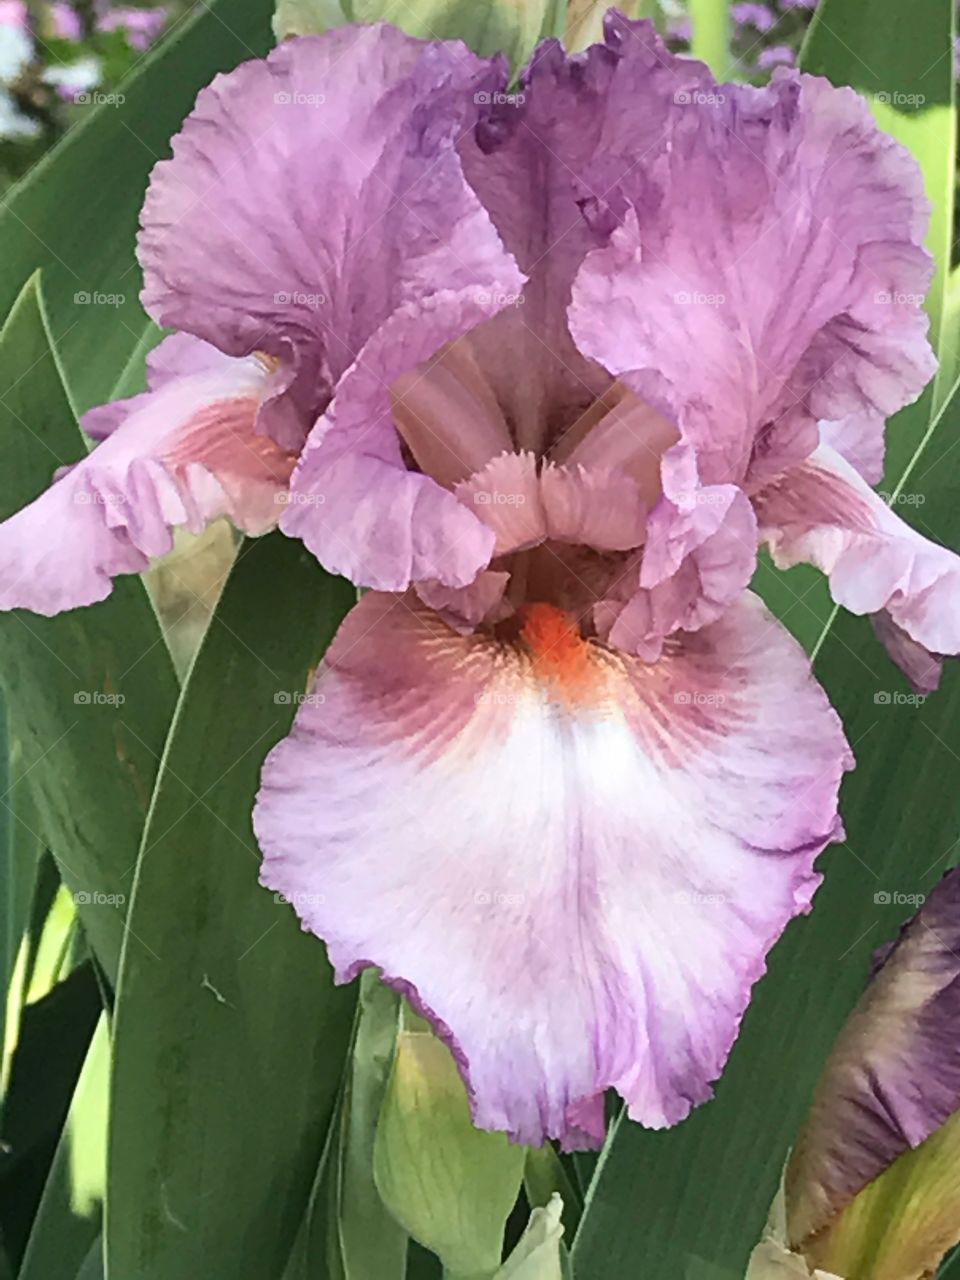 Mauve Iris Flowers in Garden with Green Leaves 